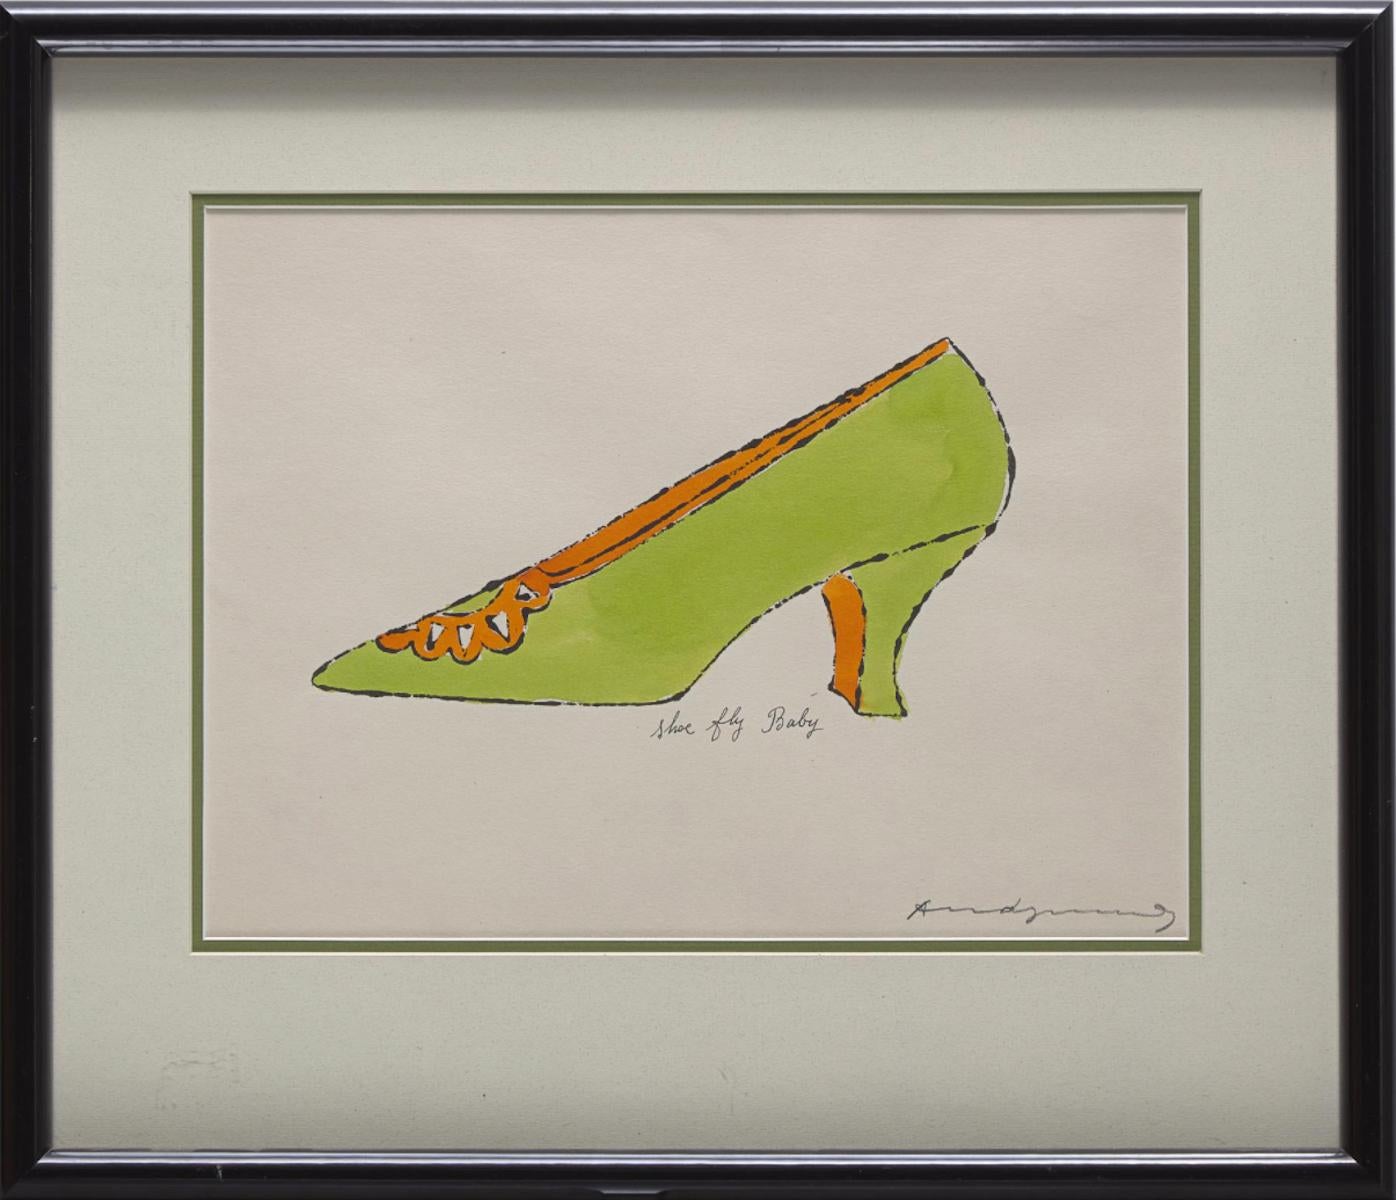 Andy Warhol 'Shoe Fly Baby' 1955 For Sale 3